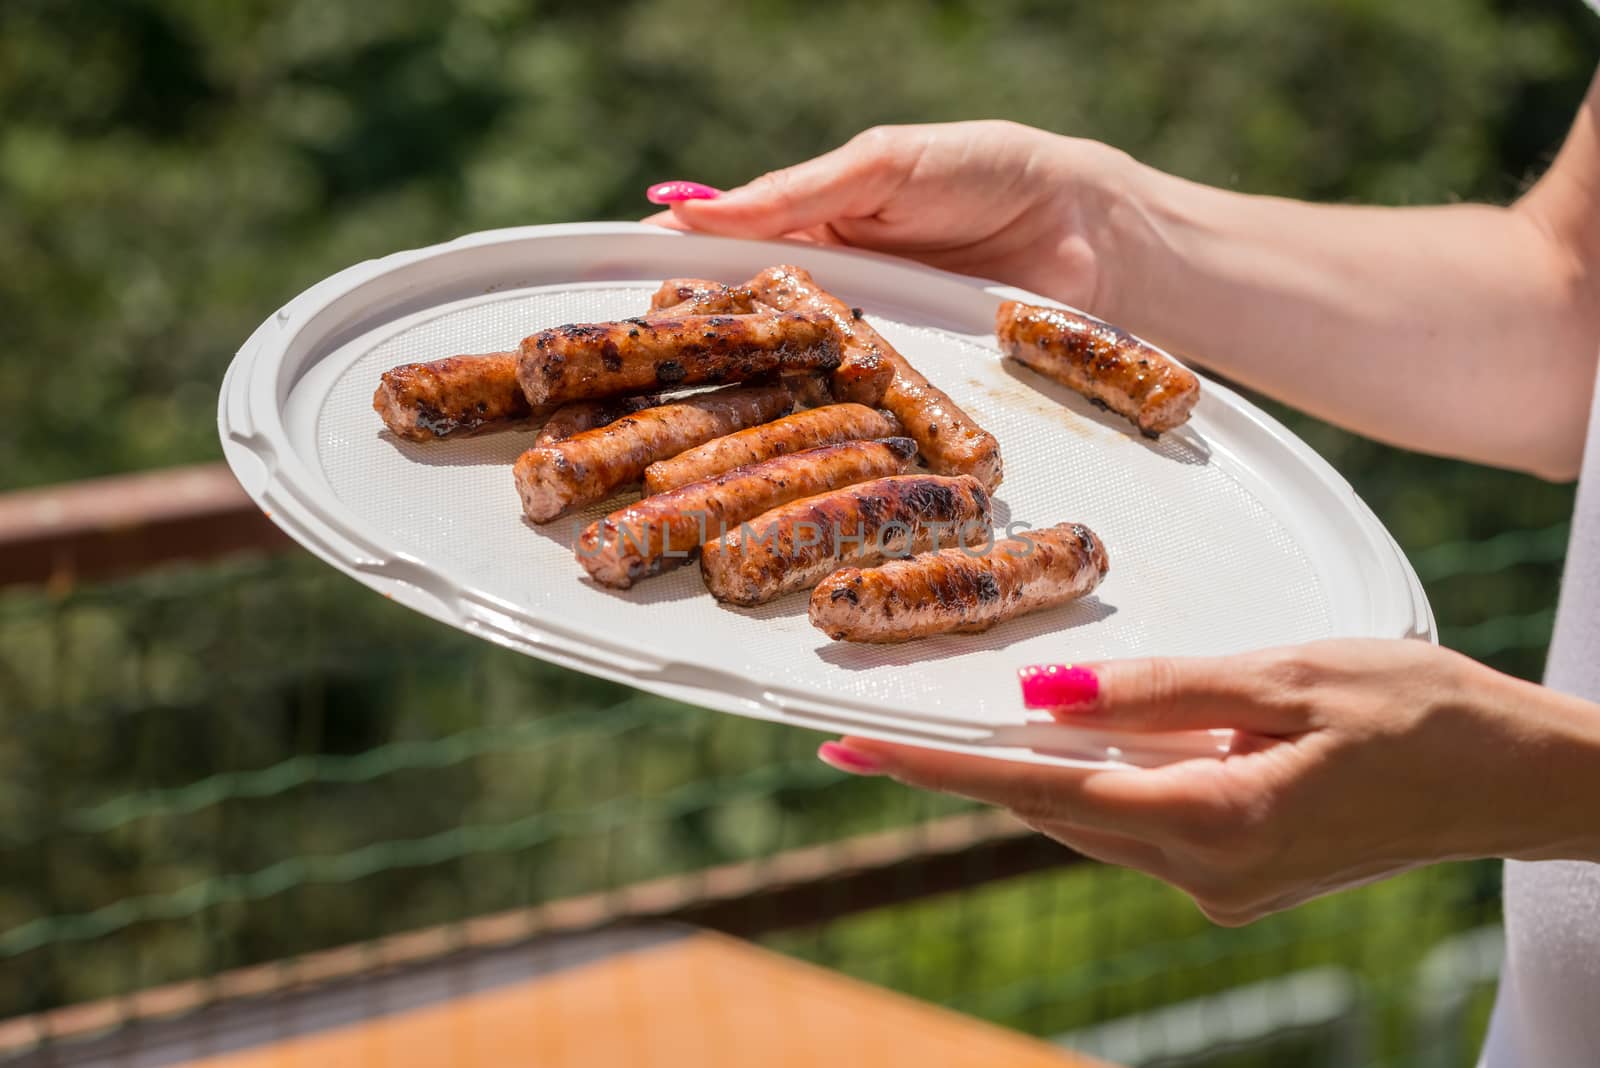 Pictured just cooked pork sausages issued in a plastic plate held by hand.